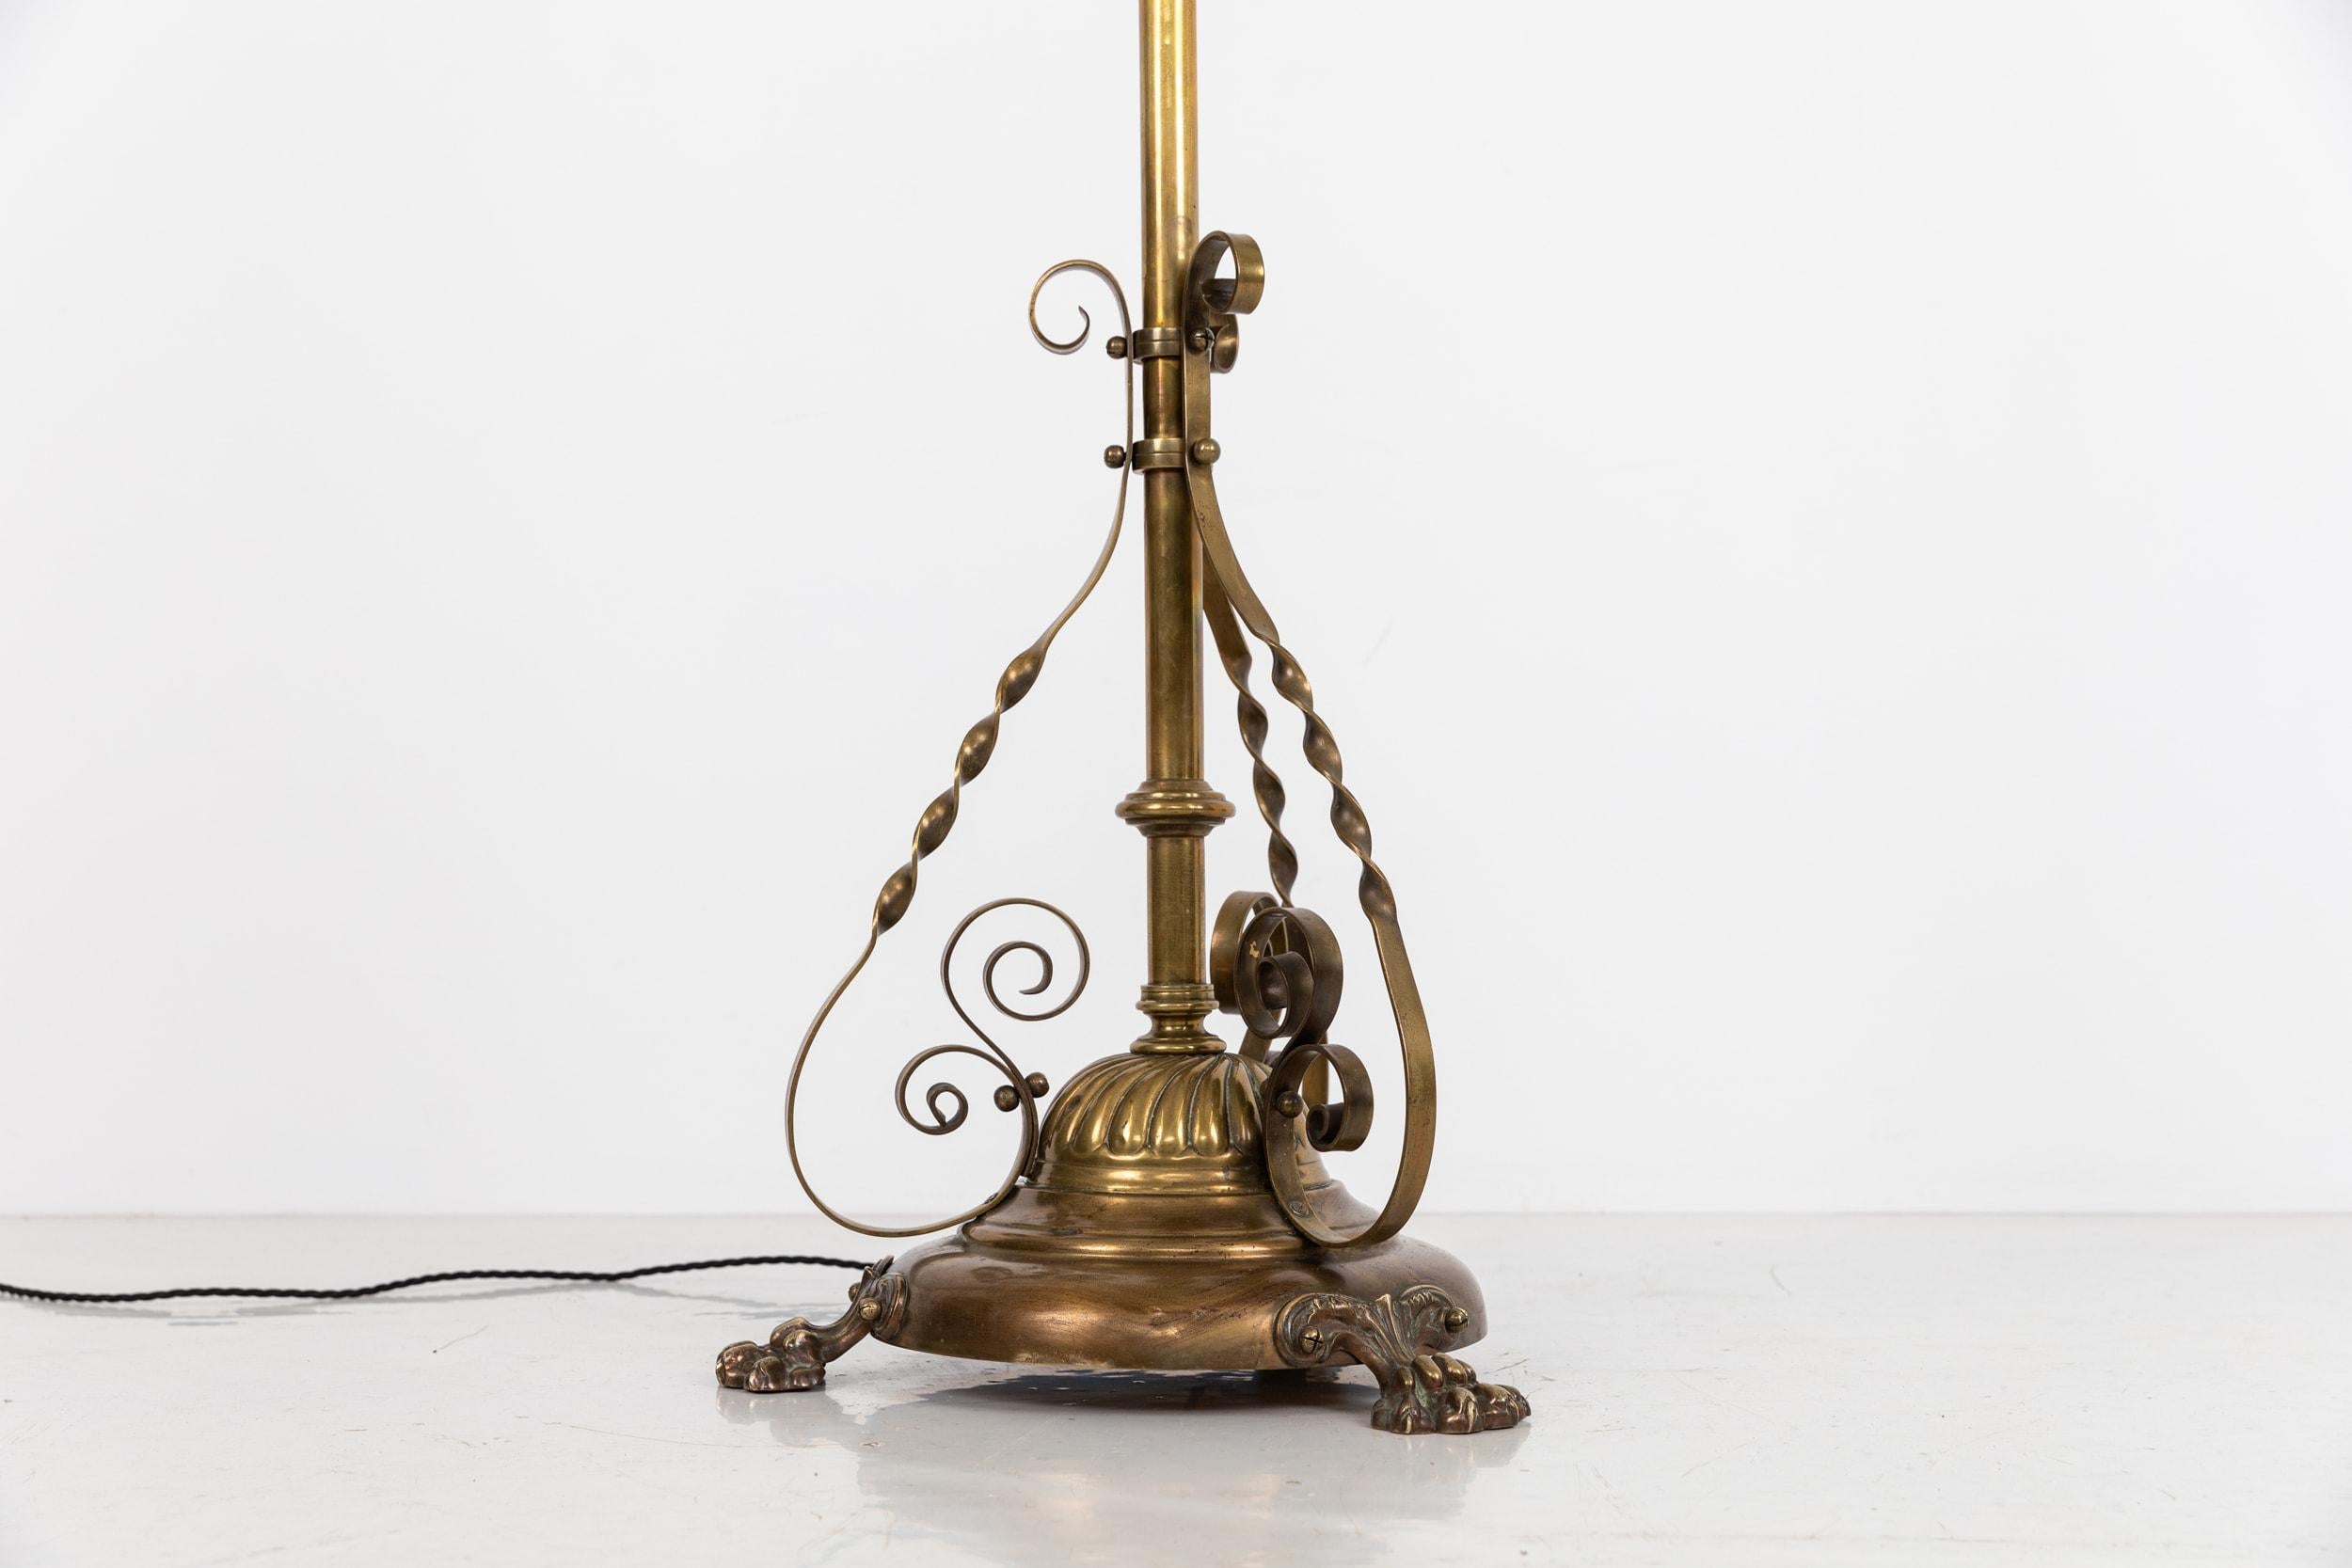 An incredibly elegant standard lamp made in England by F&C Osler. c.1920.

Faintly stamped to the underside of the base with 'F&C' - alluding to the makers as they were known from 1906. The lamp is very heavy and of high quality, featuring an